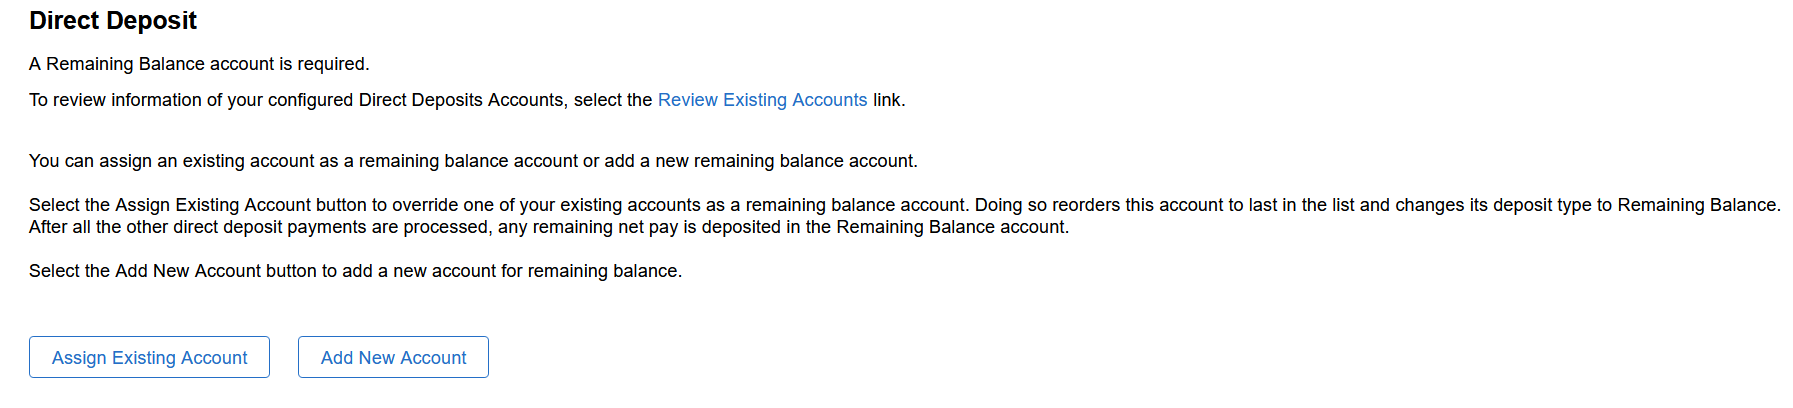 Direct Deposit page (Remaining Balance account required)